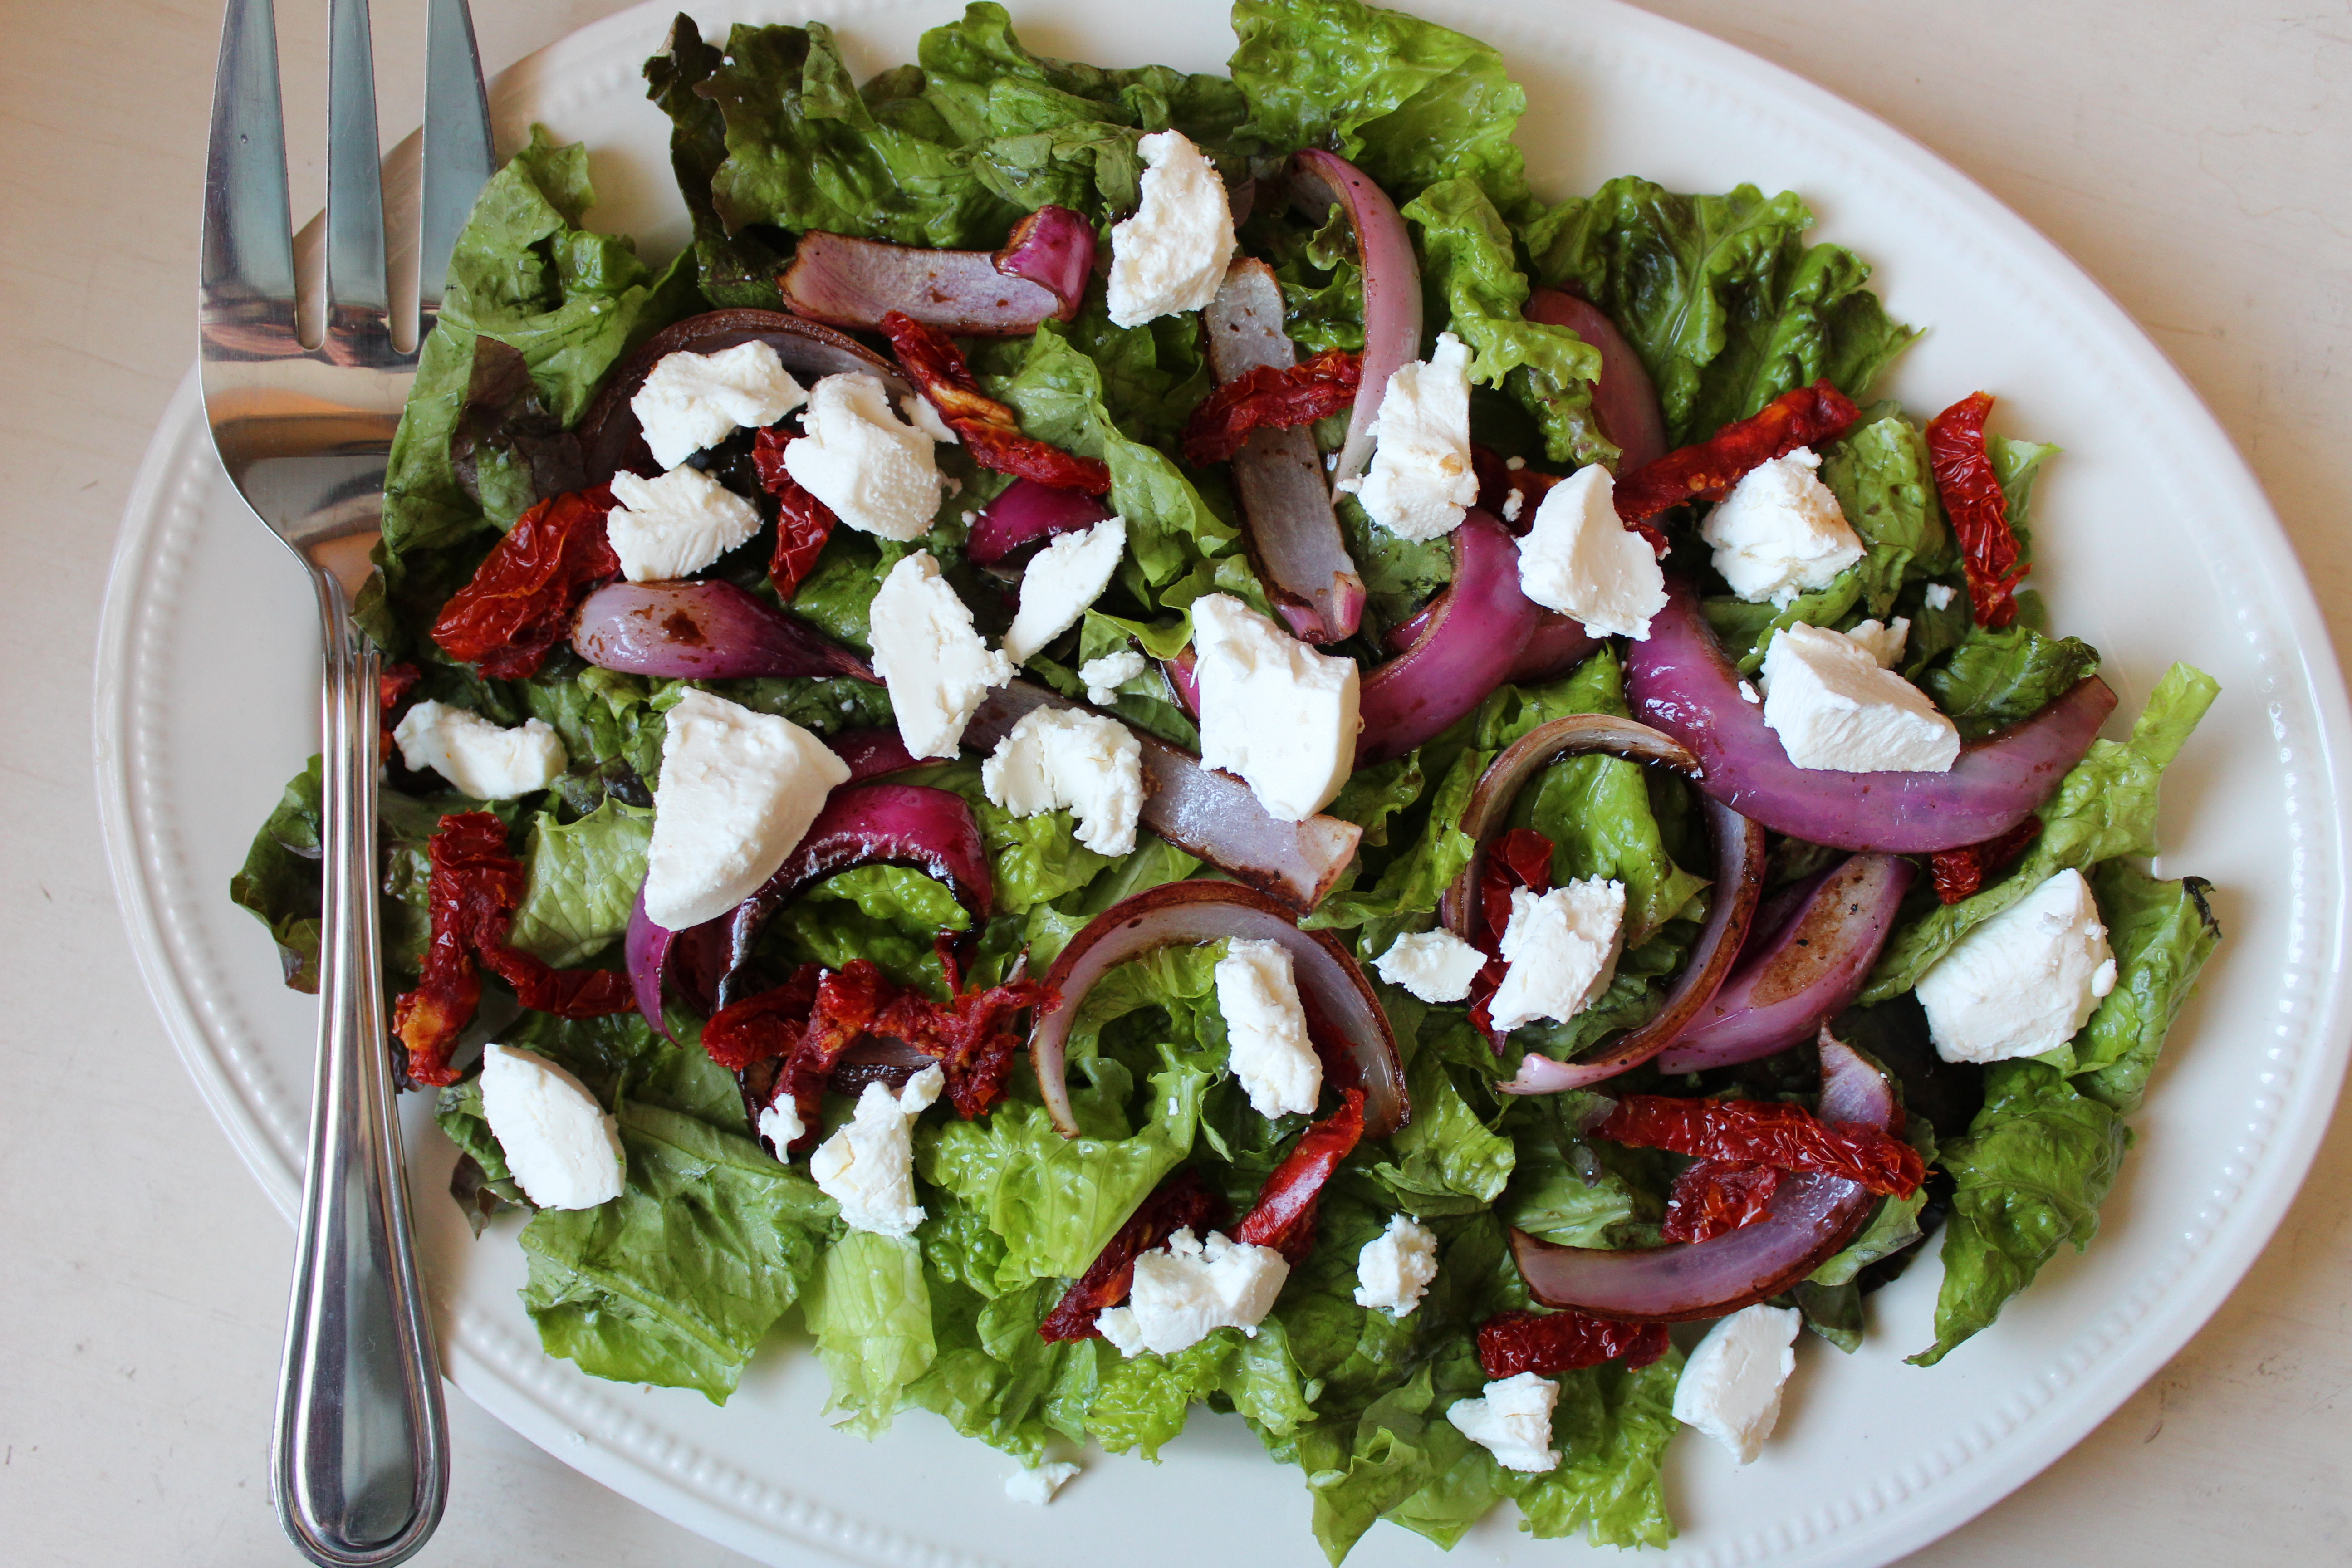 Full of flavorful ingredients like goat cheese, sun dried tomatoes, and roasted onions, then dressed with a balsamic vinaigrette, this salad comes together quickly and simply. Serve it as an appetizer or an easy lunch!